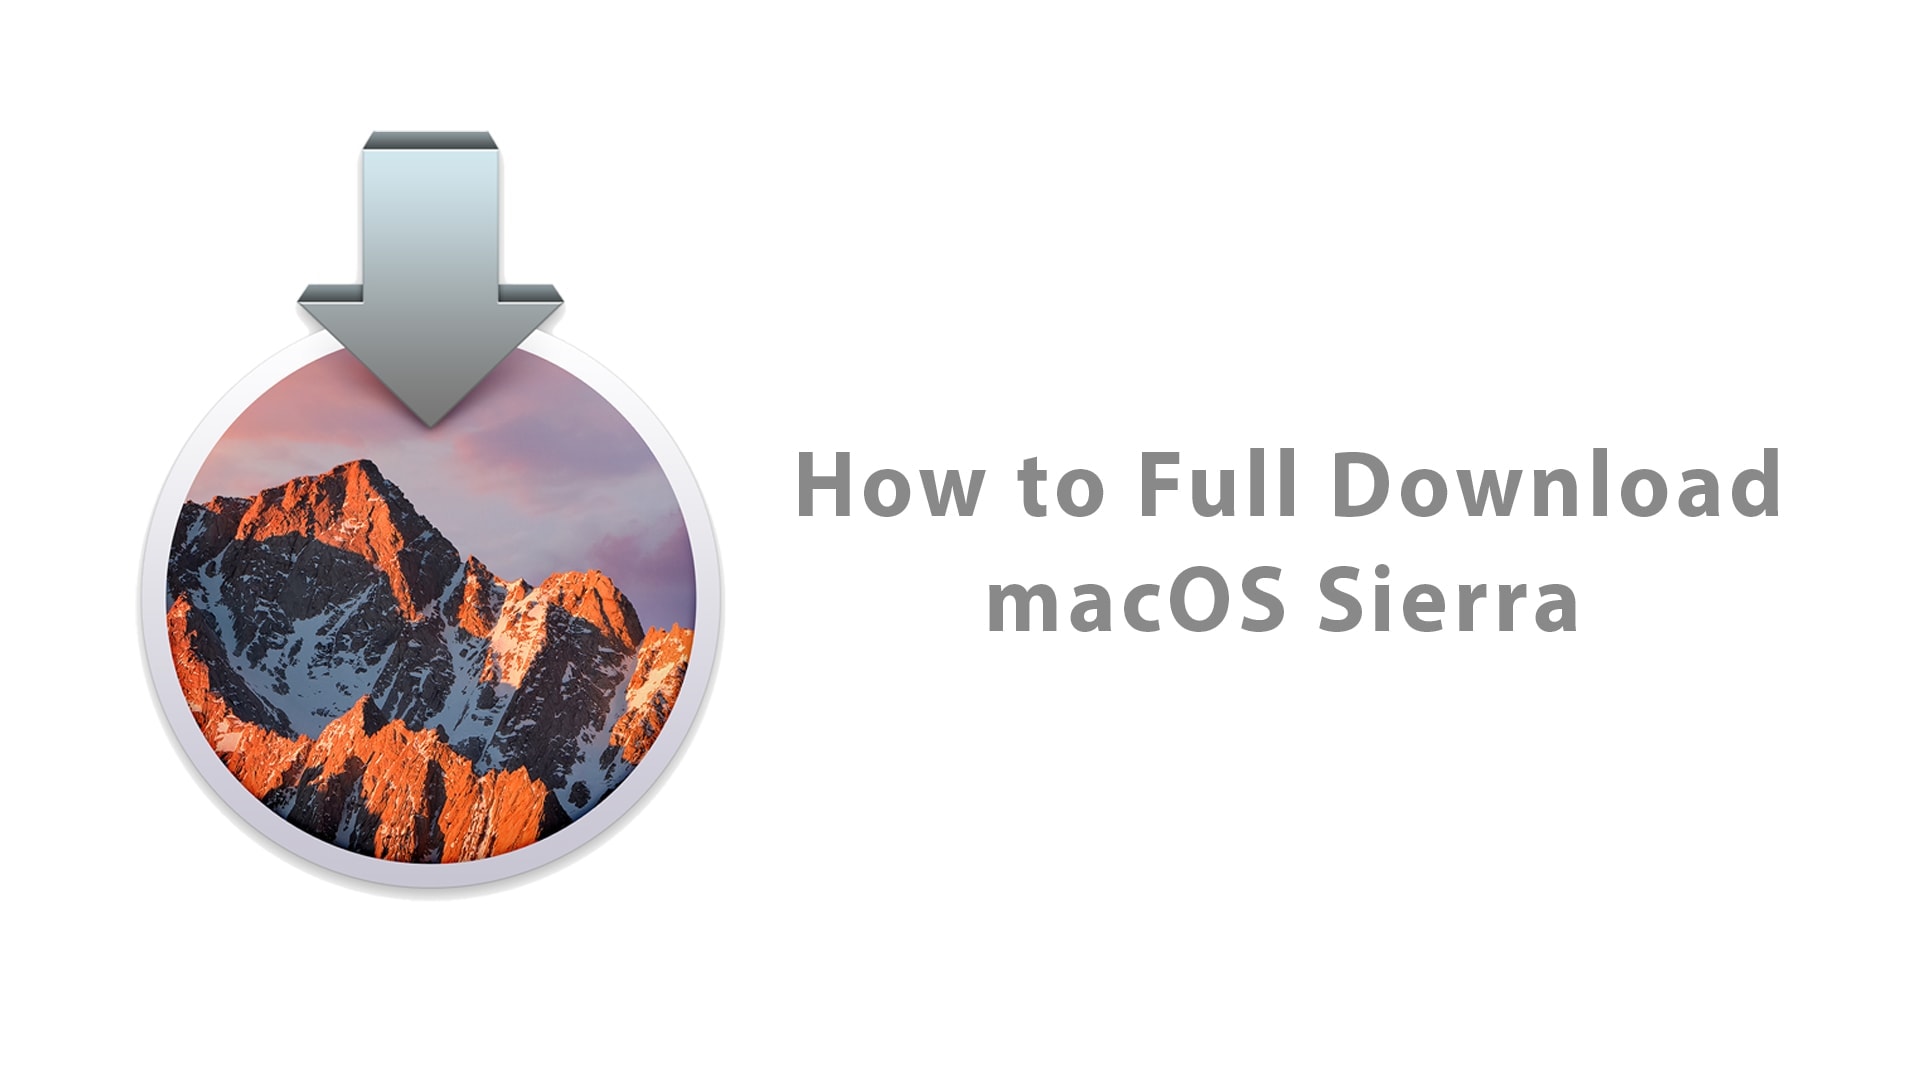 where does mac download sierra to